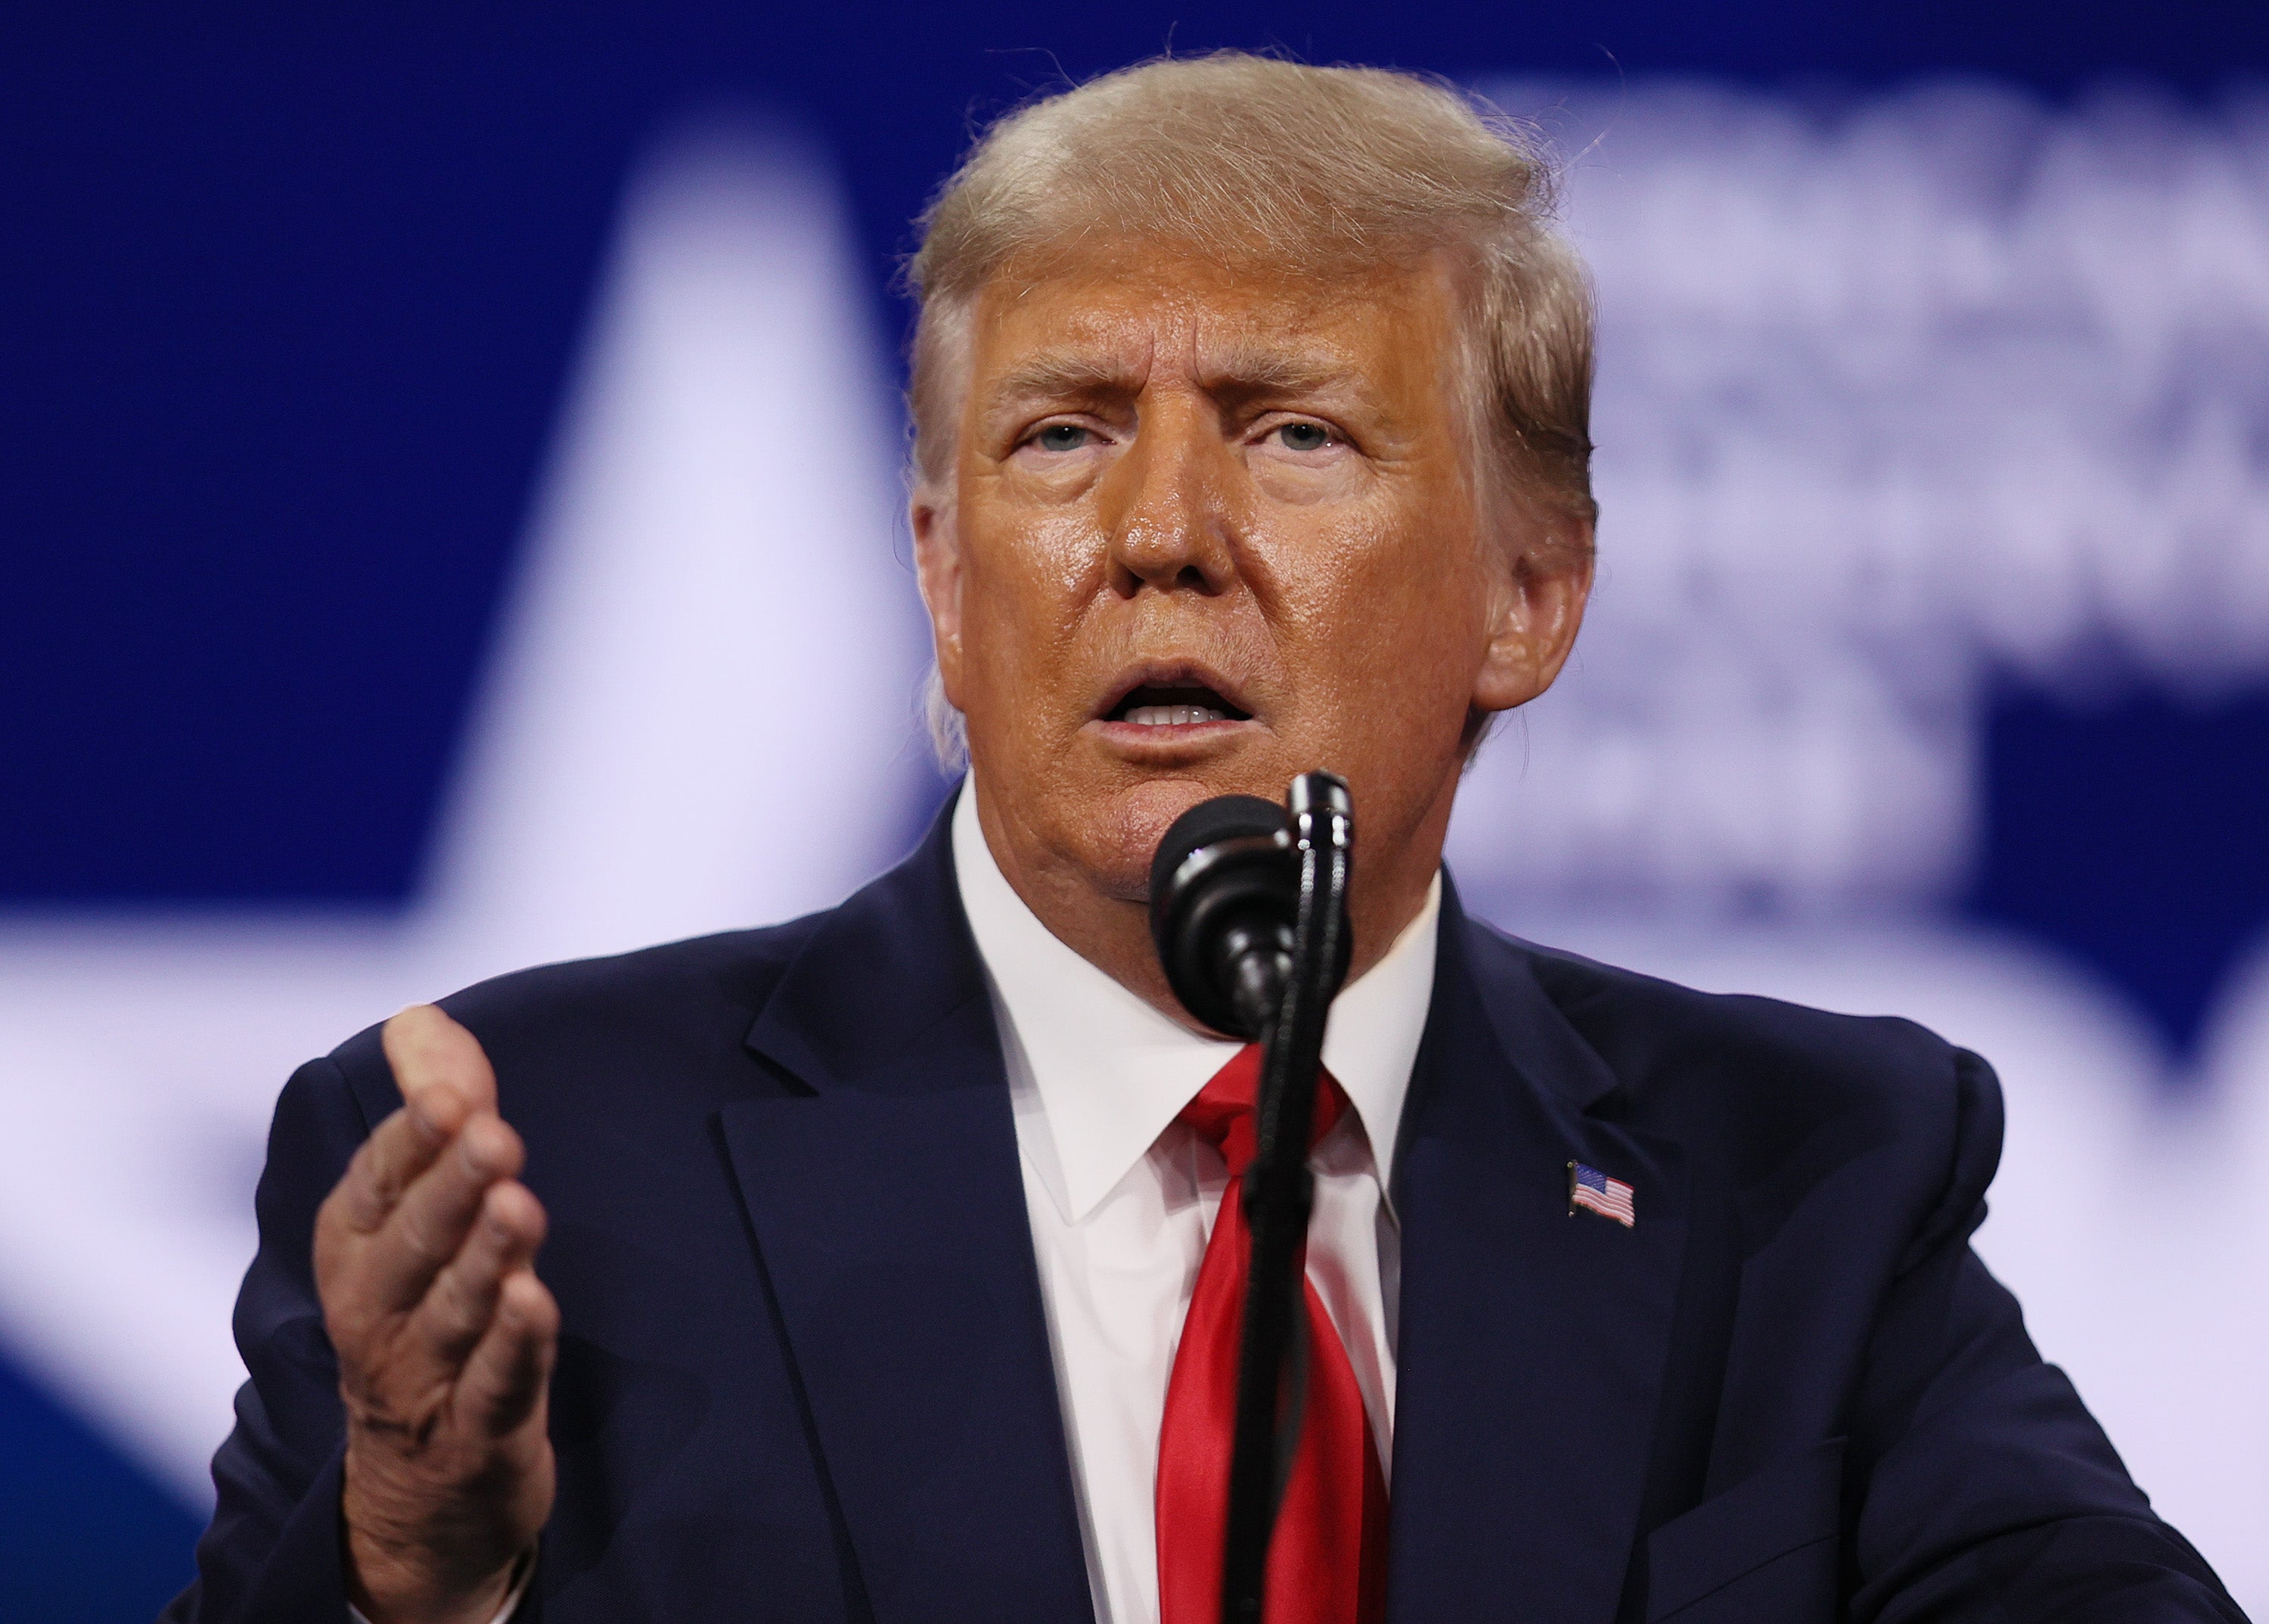 Donald Trump addresses the Conservative Political Action Conference on 28 February, 2021 in Orlando, Florida.